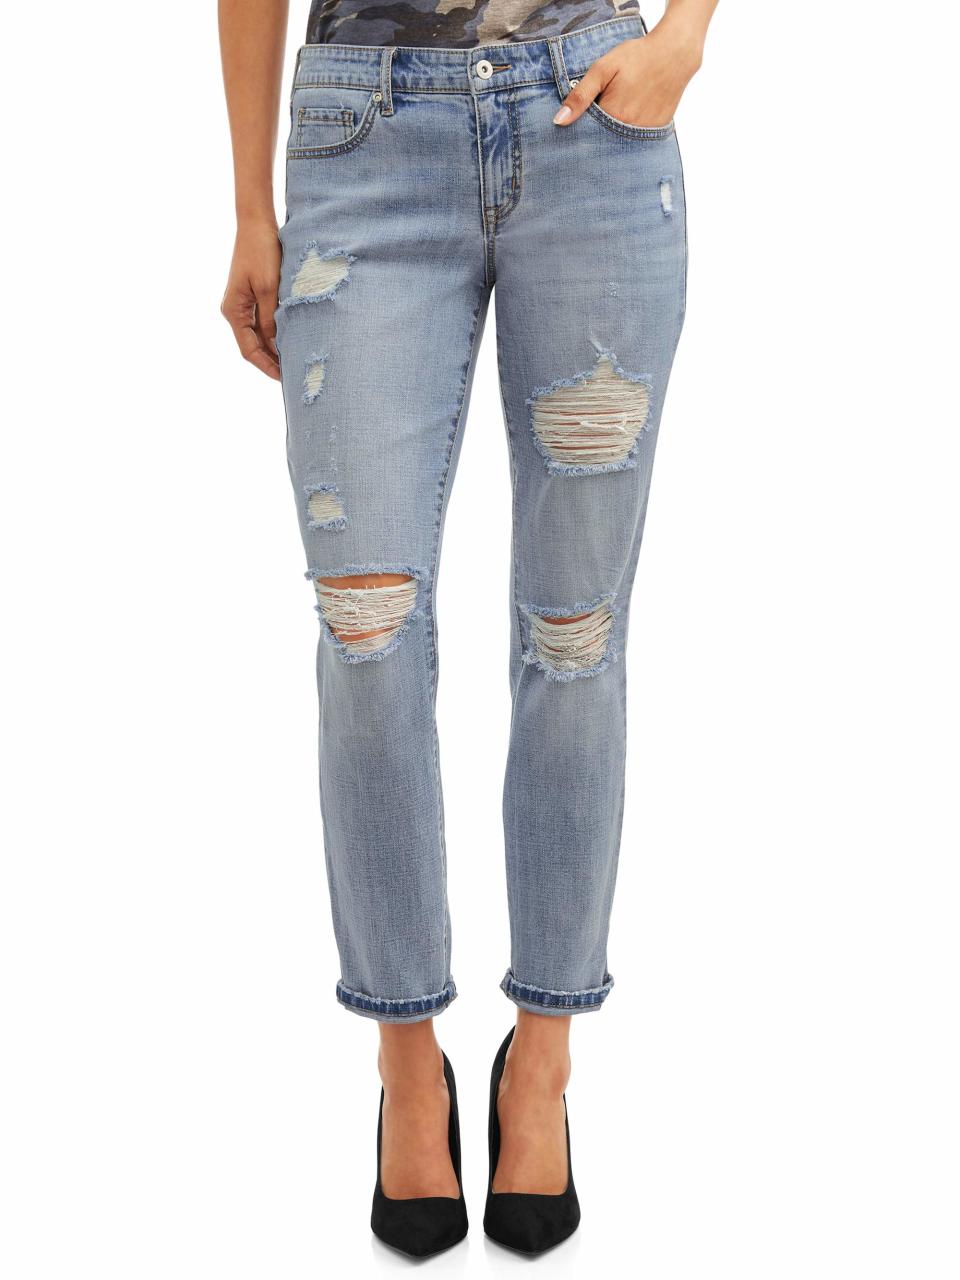 We've never seen a rugged pair of jeans look so fashionable. (Photo: Walmart)